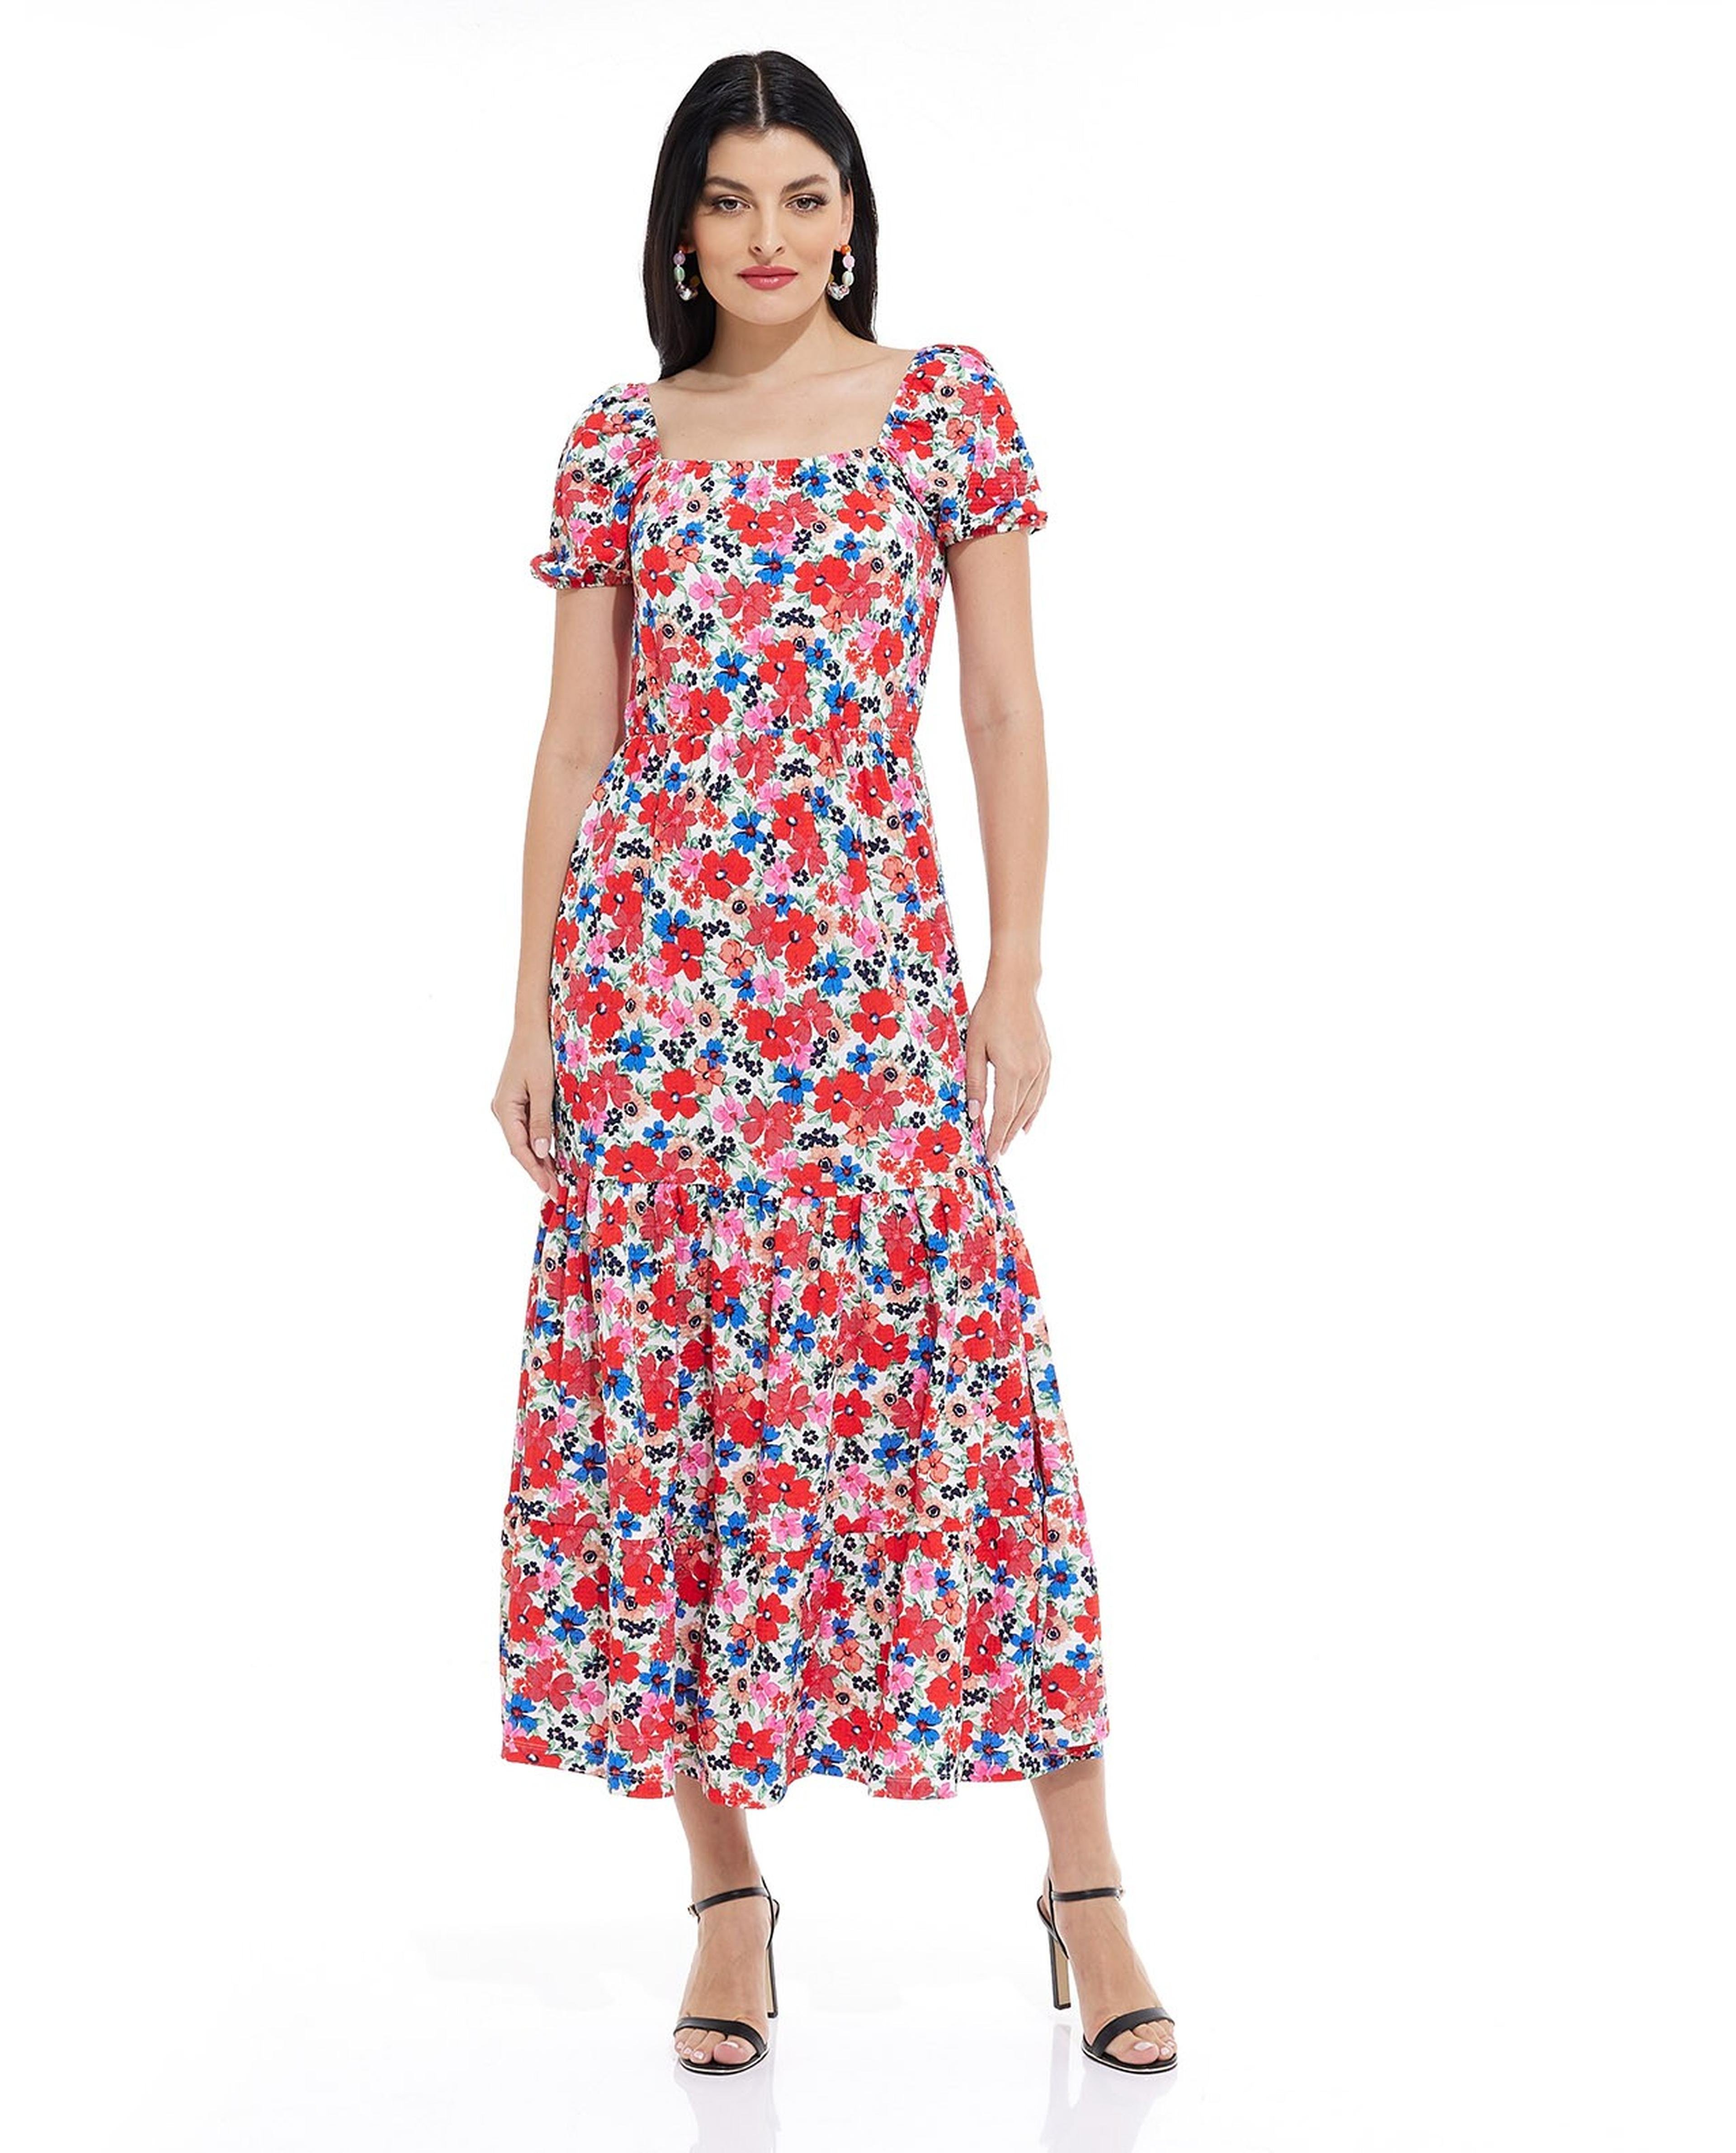 Floral Print Tiered Dress with Square Neck and Puff Sleeves